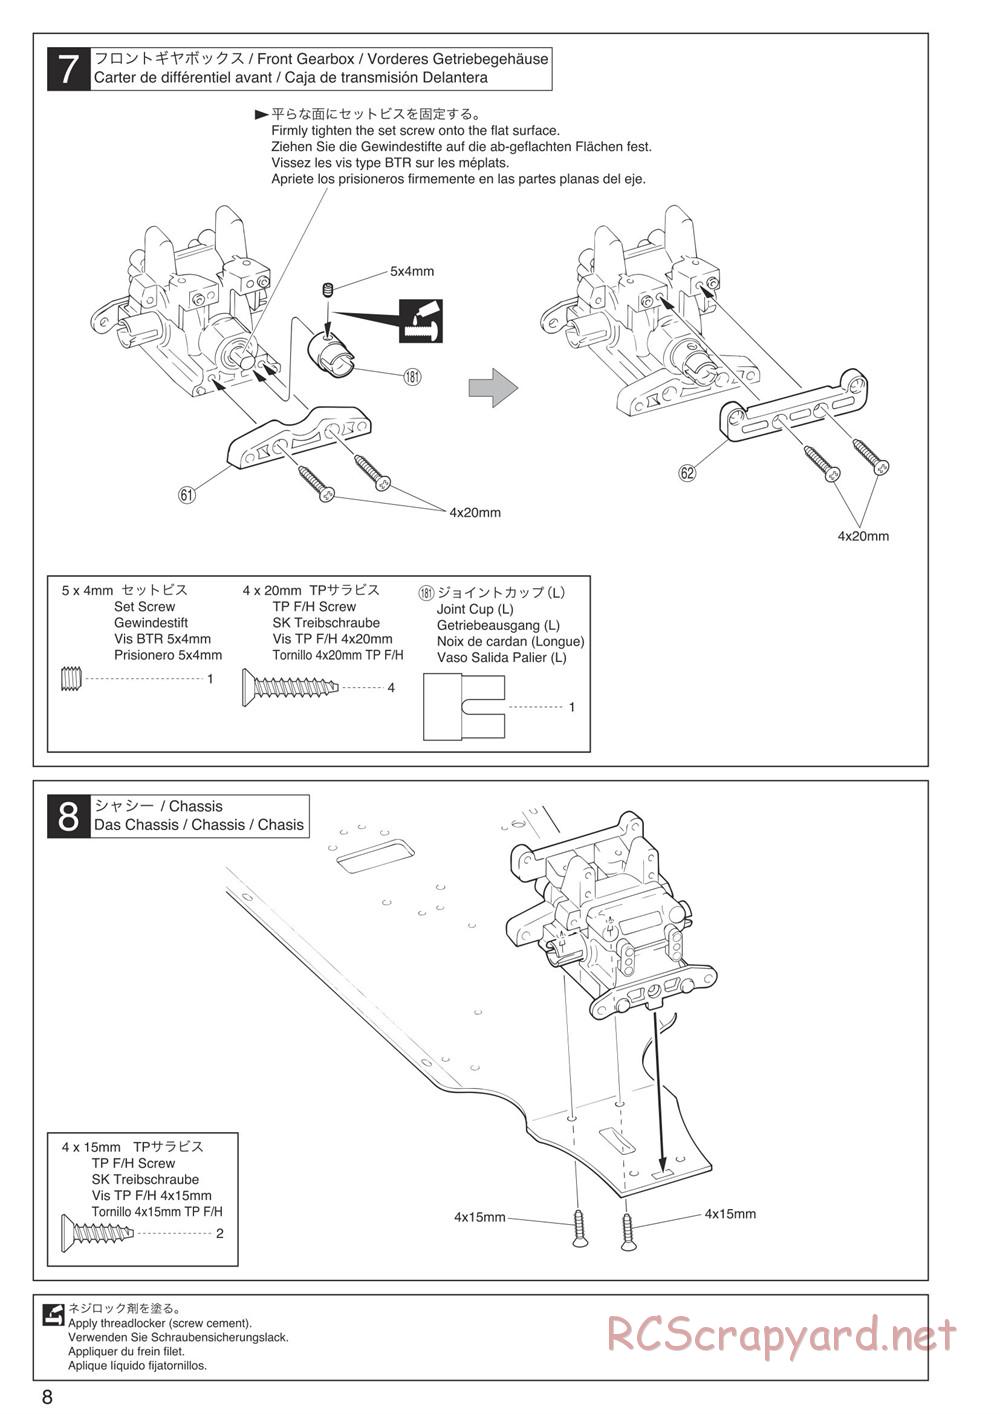 Kyosho - Inferno Neo 3.0 - Manual - Page 8